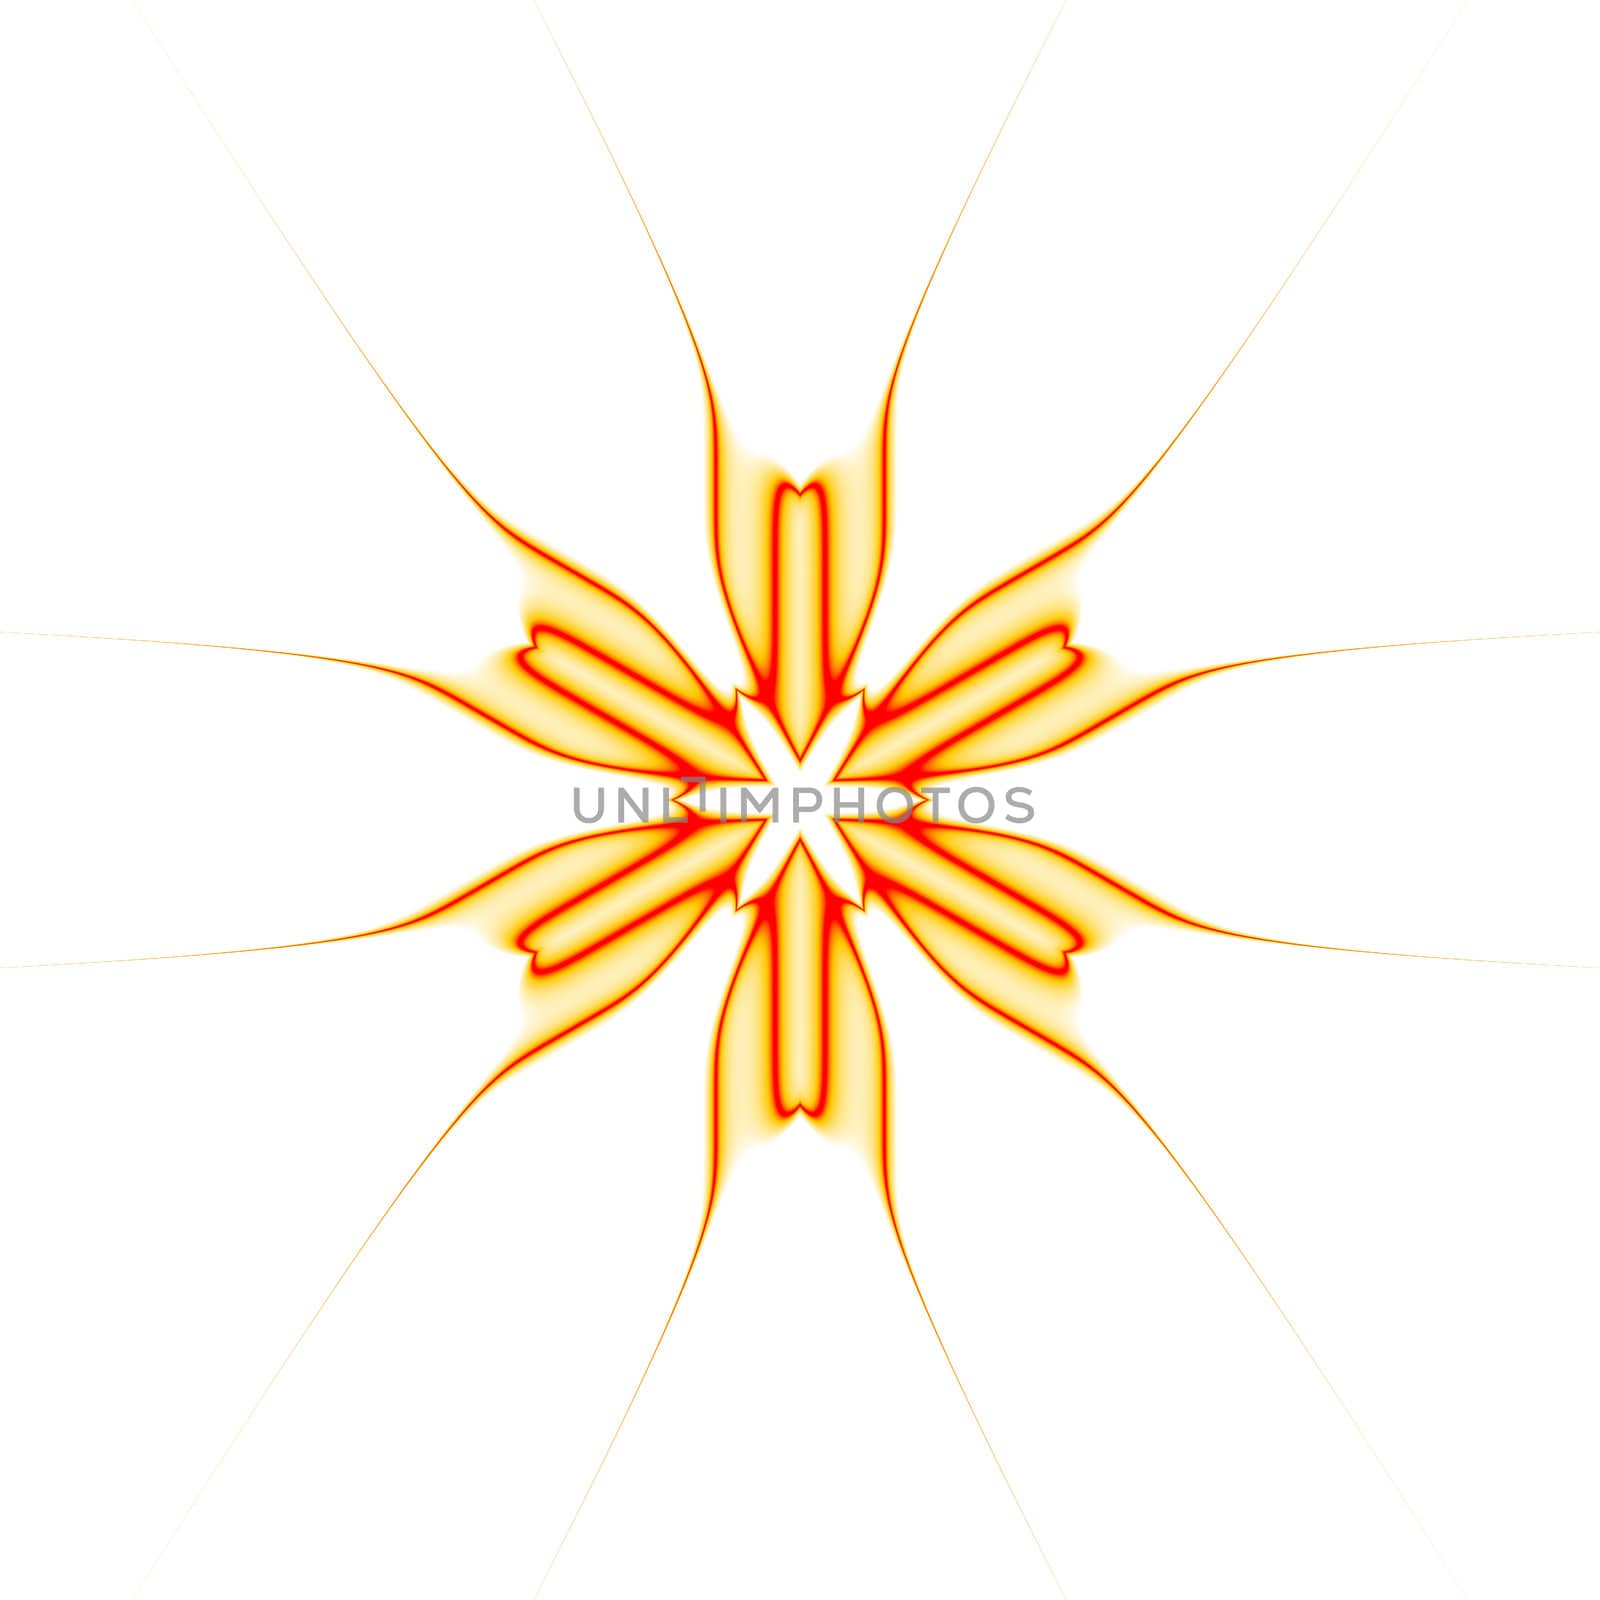 An abstract six pointed star shaped illustrated image in shades of orange on a white background.